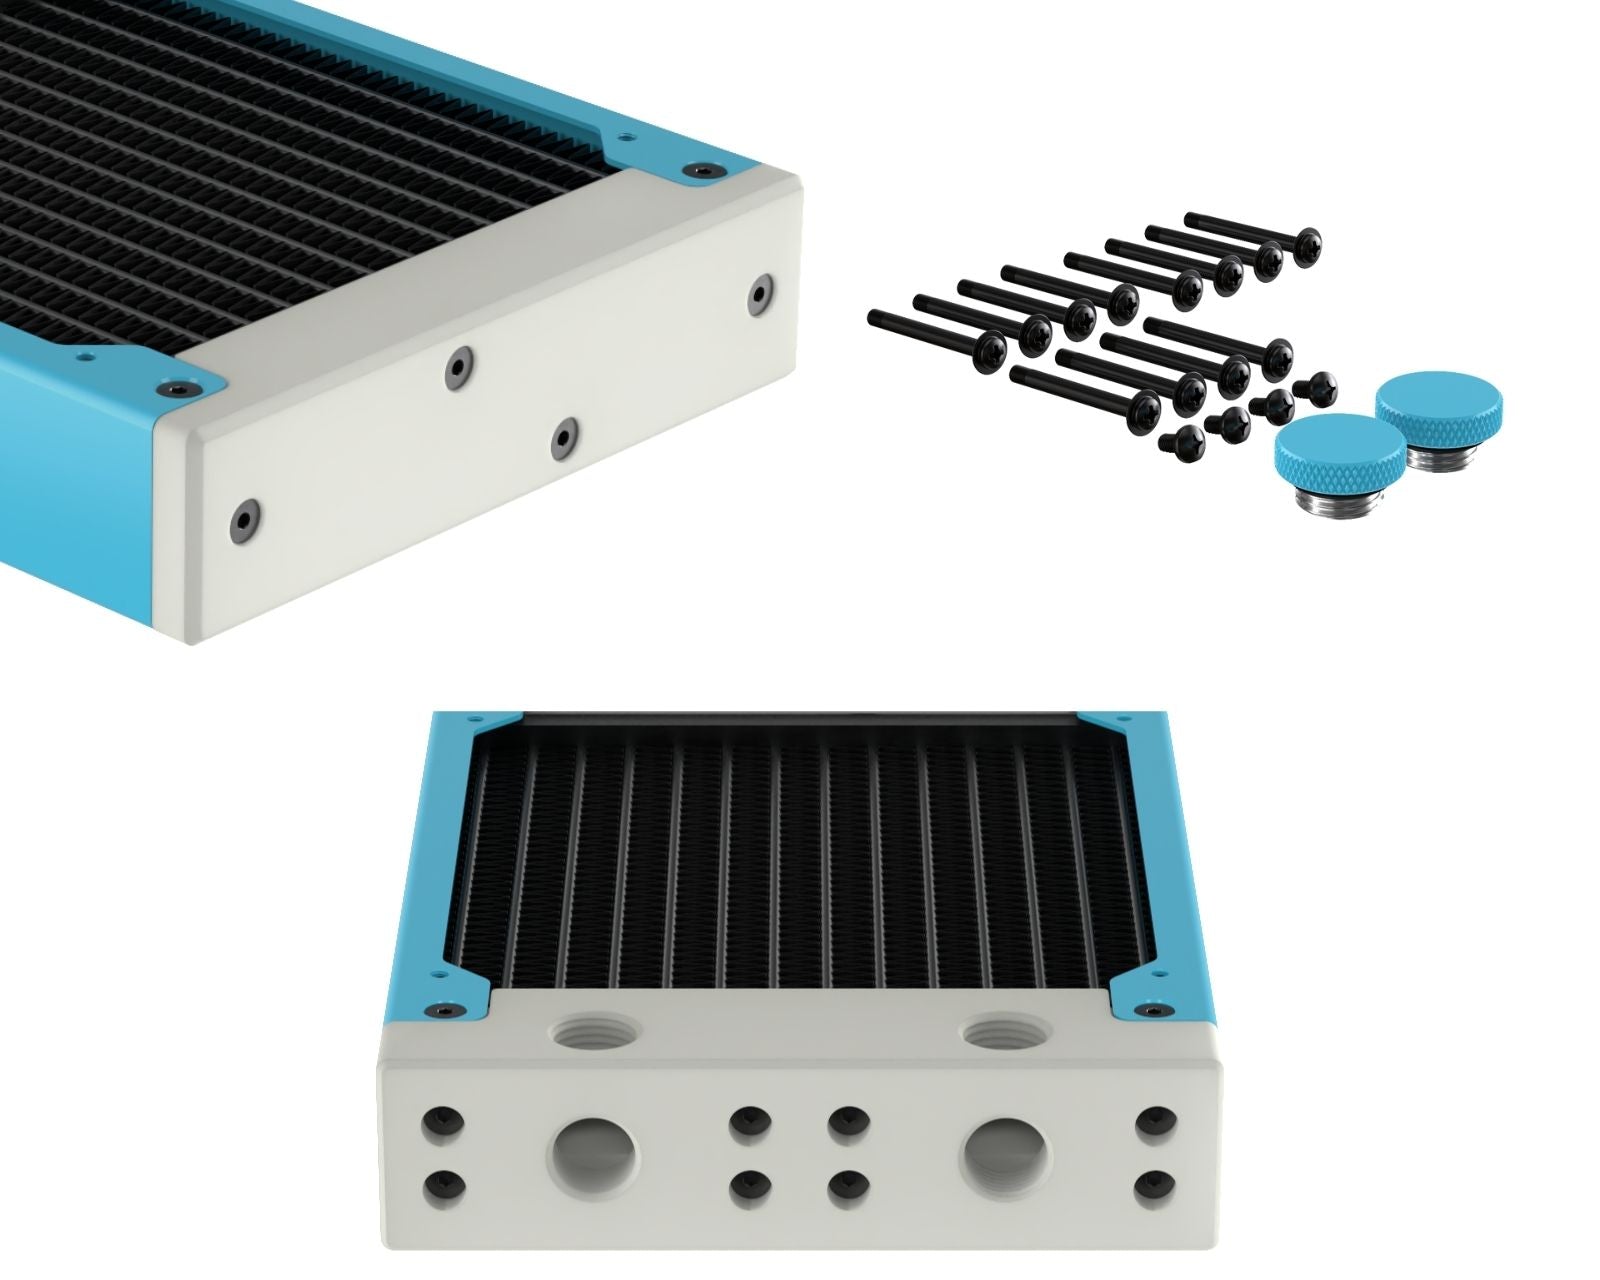 PrimoChill 360SL (30mm) EXIMO Modular Radiator, White POM, 3x120mm, Triple Fan (R-SL-W36) Available in 20+ Colors, Assembled in USA and Custom Watercooling Loop Ready - Sky Blue